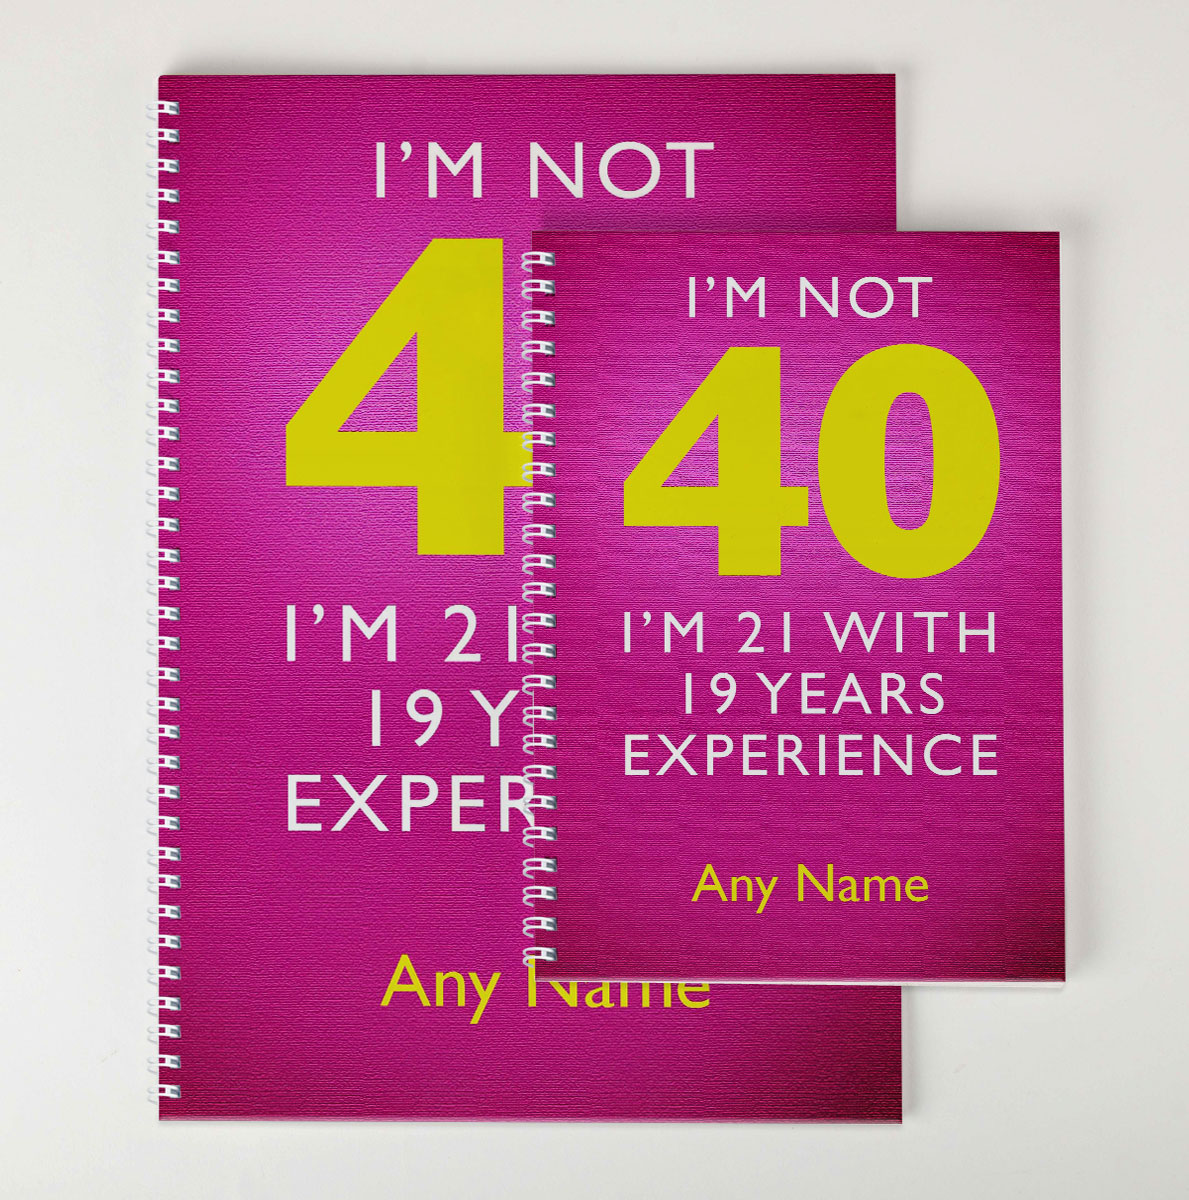 Personalised Pink I'm Not 40 Notebook